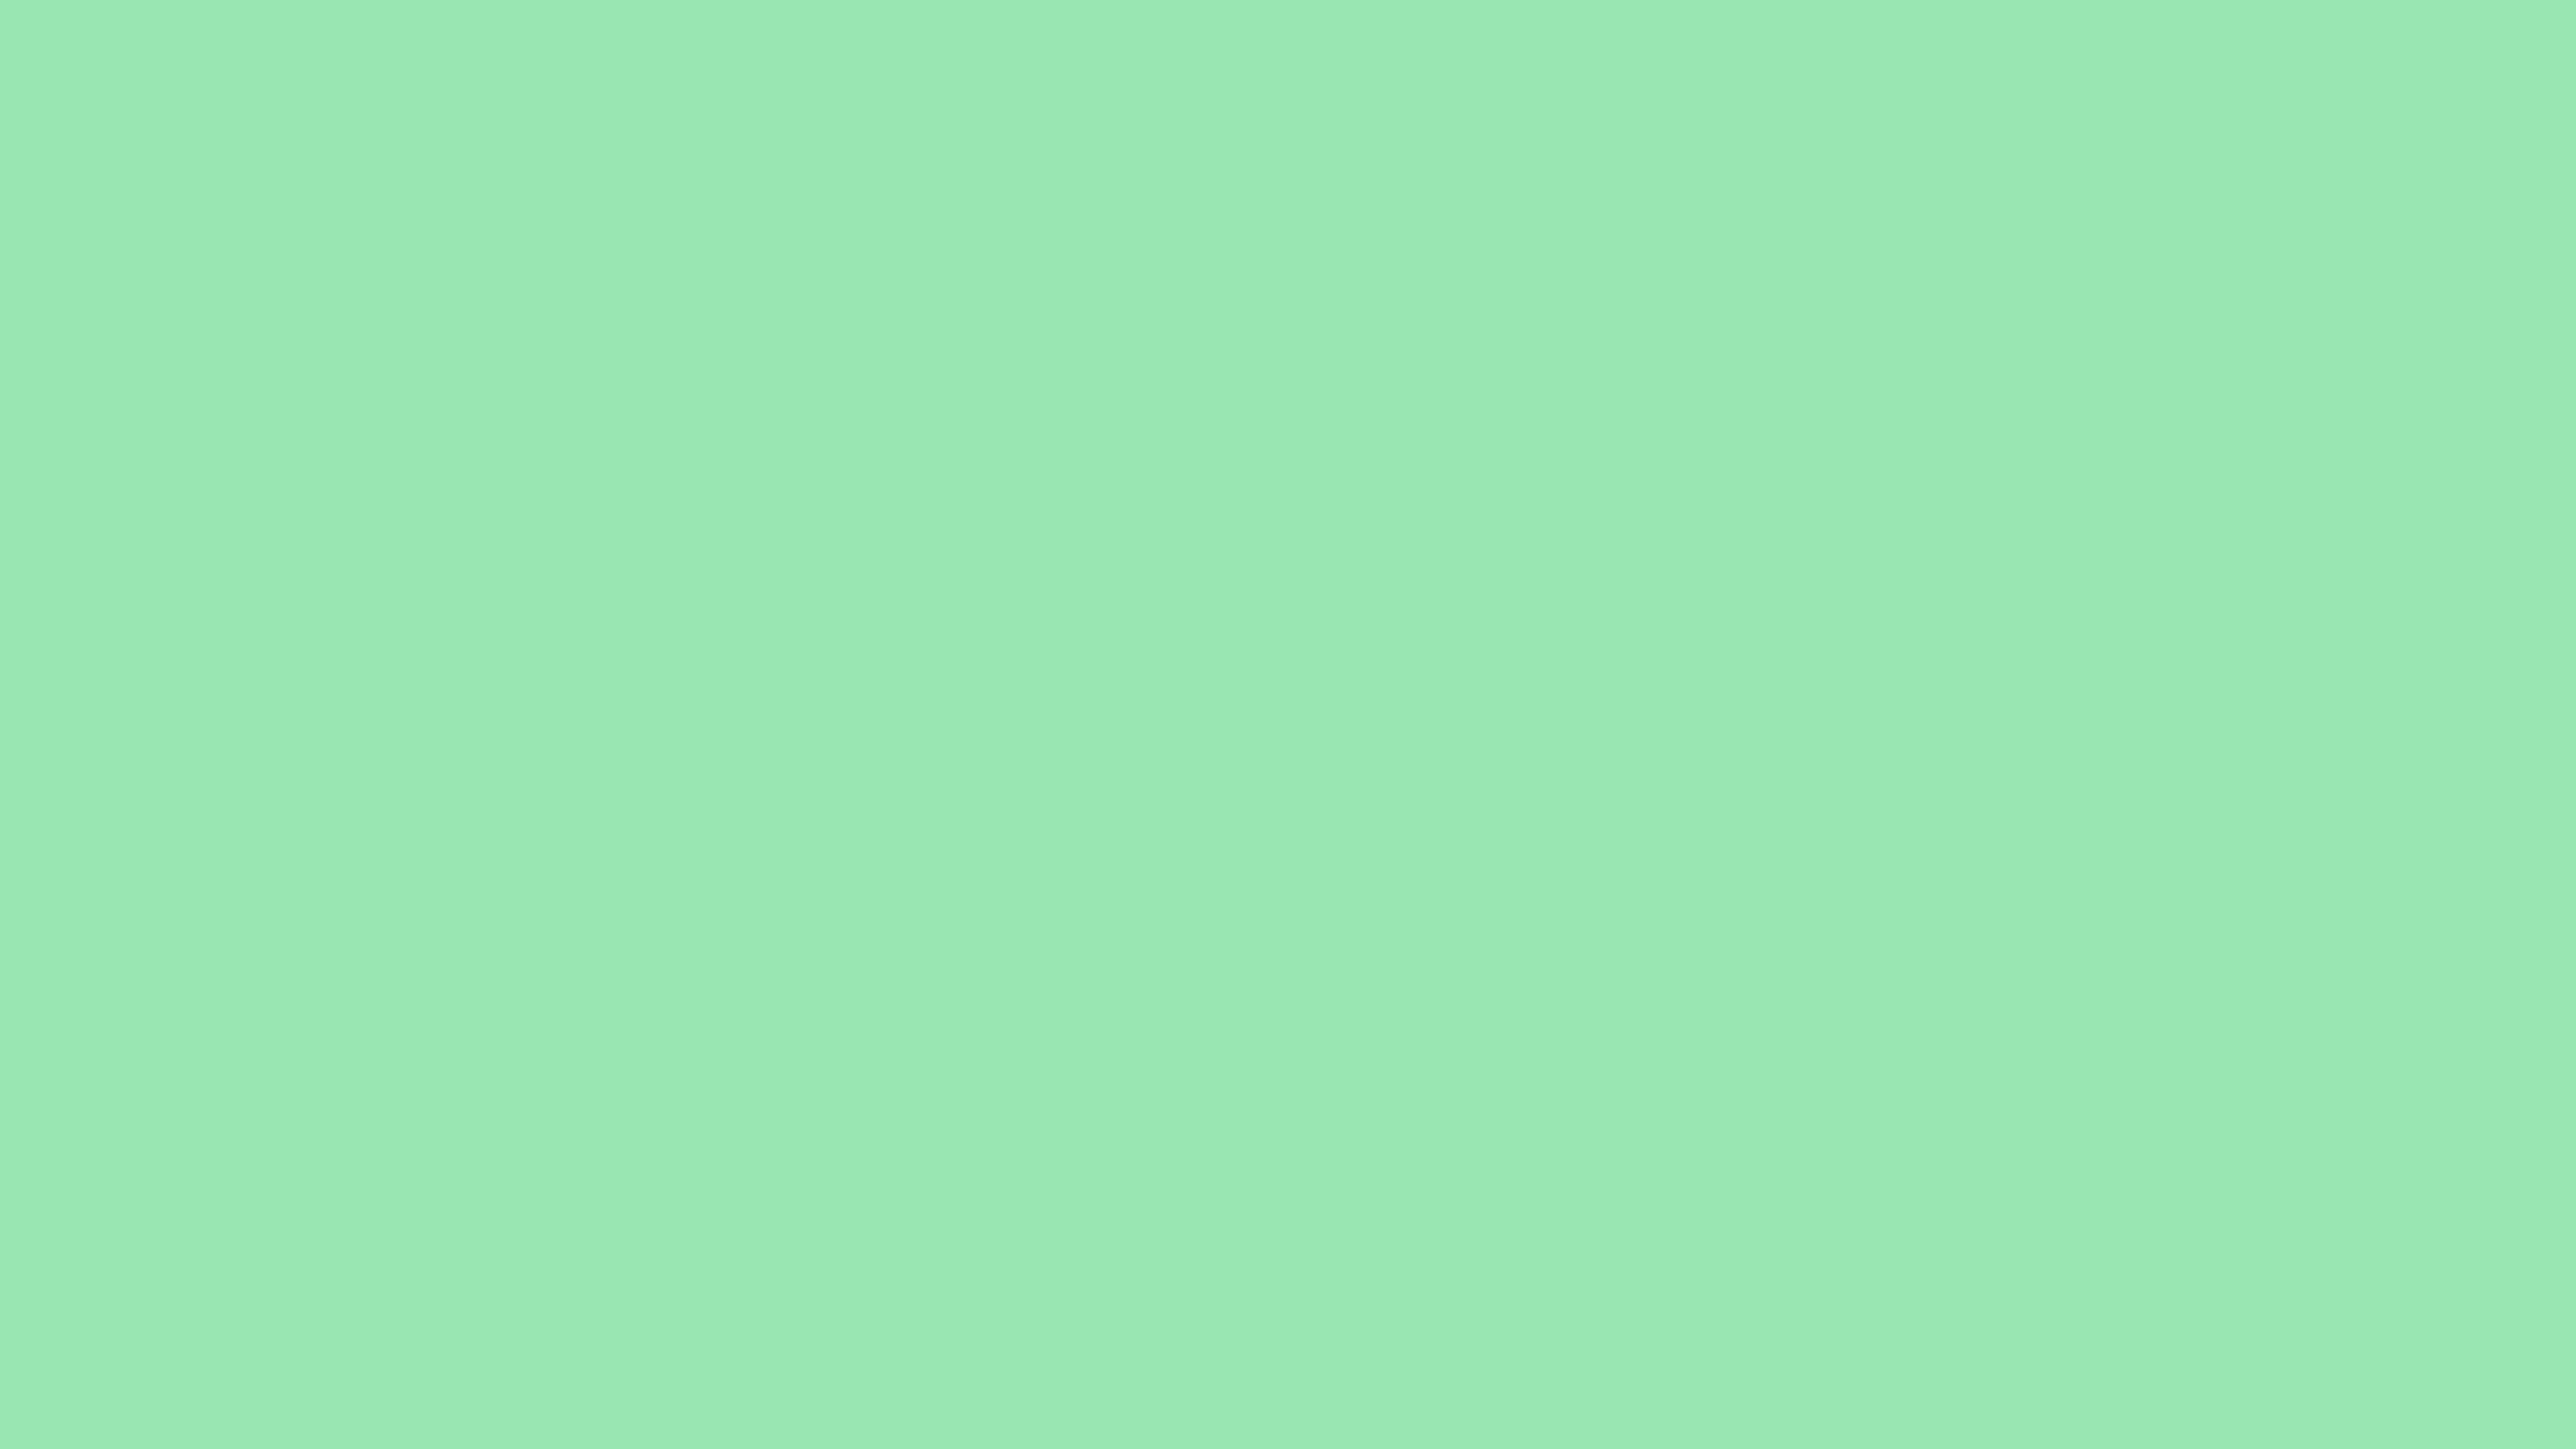 91 Green Solid Color Backgrounds ideas  solid color backgrounds color  solid color